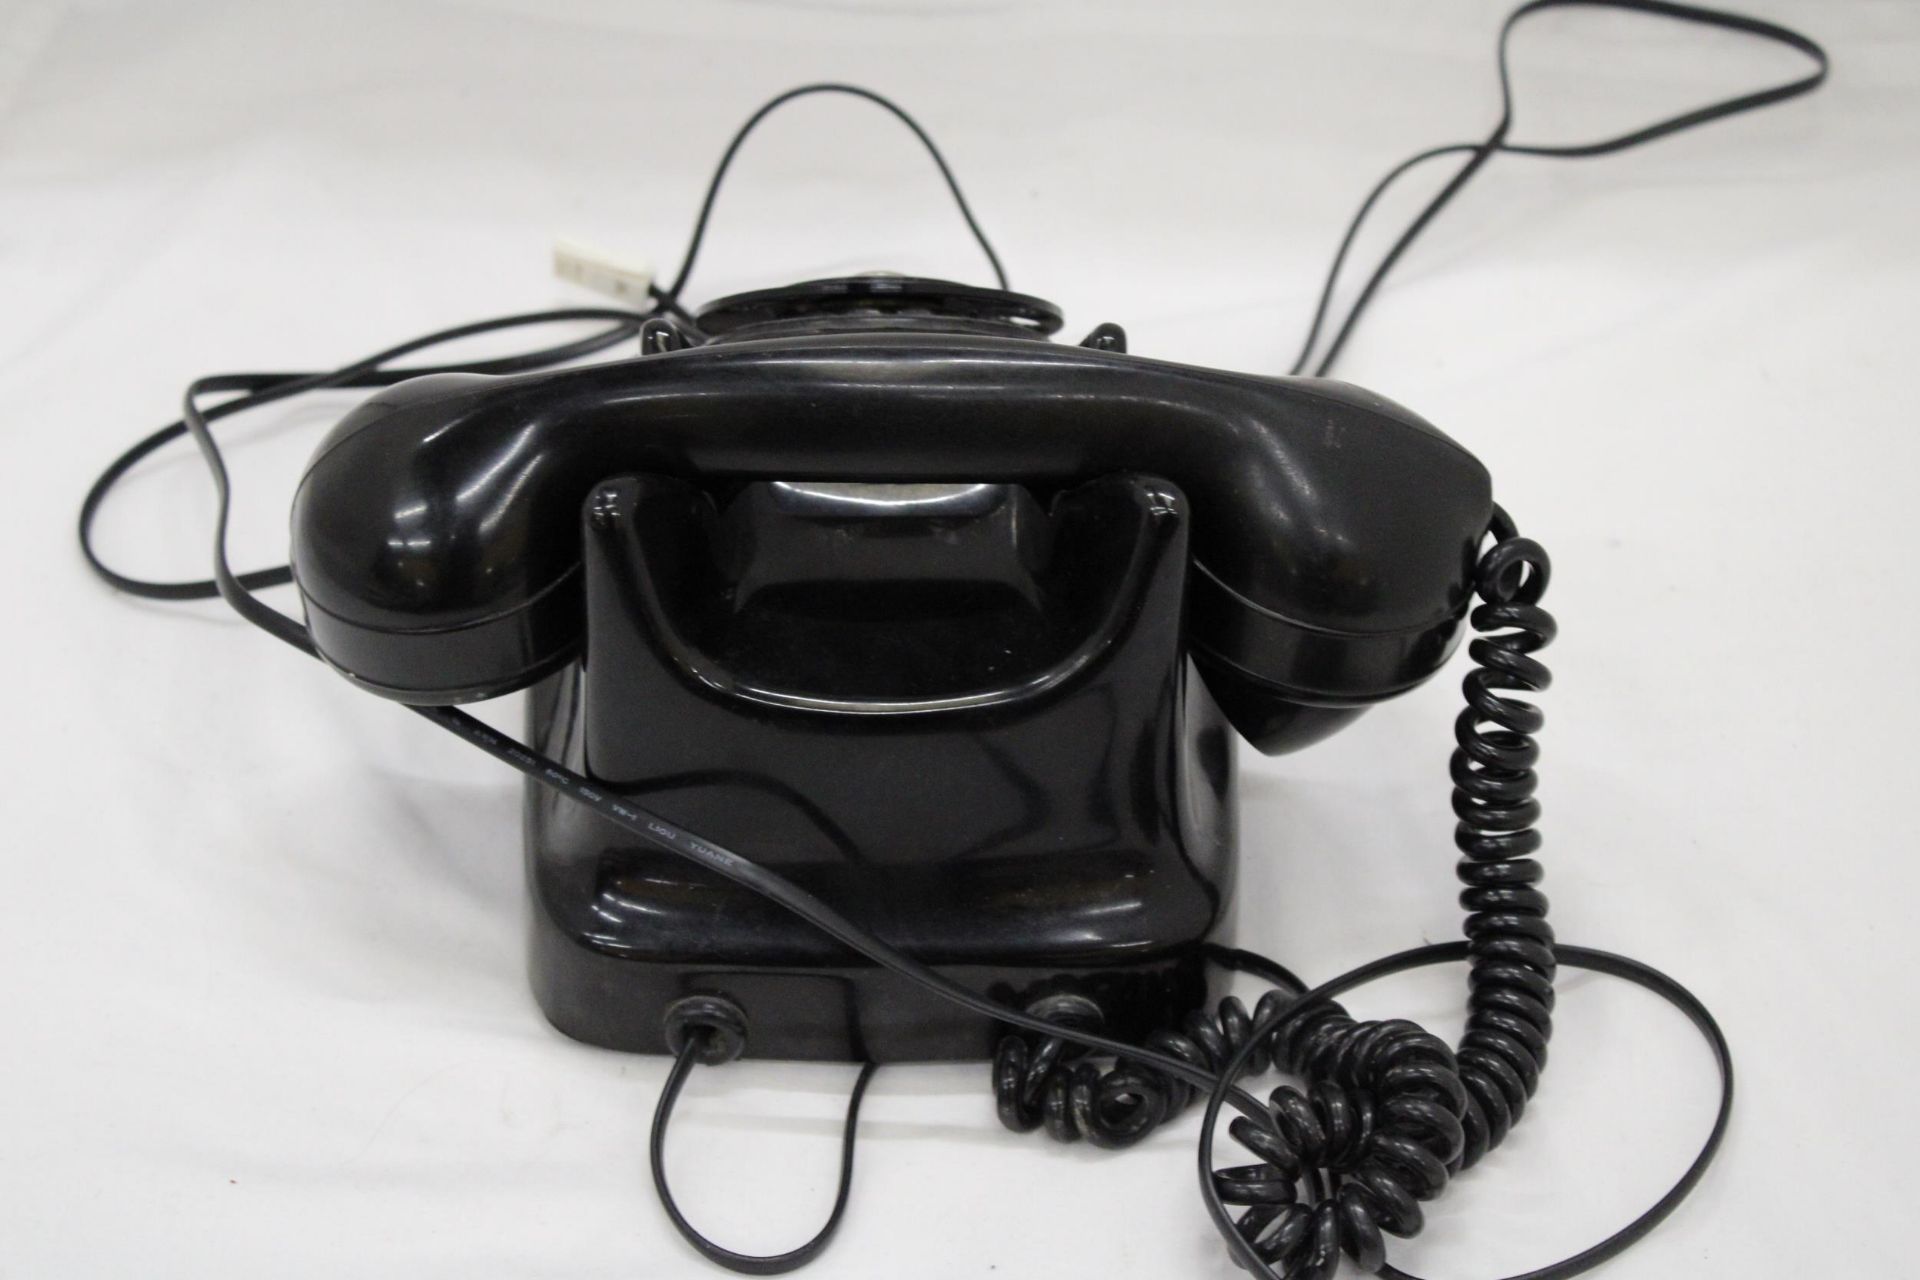 A VERY HEAVY VINTAGE TERRESTIAL TELEPHONE - Image 4 of 5